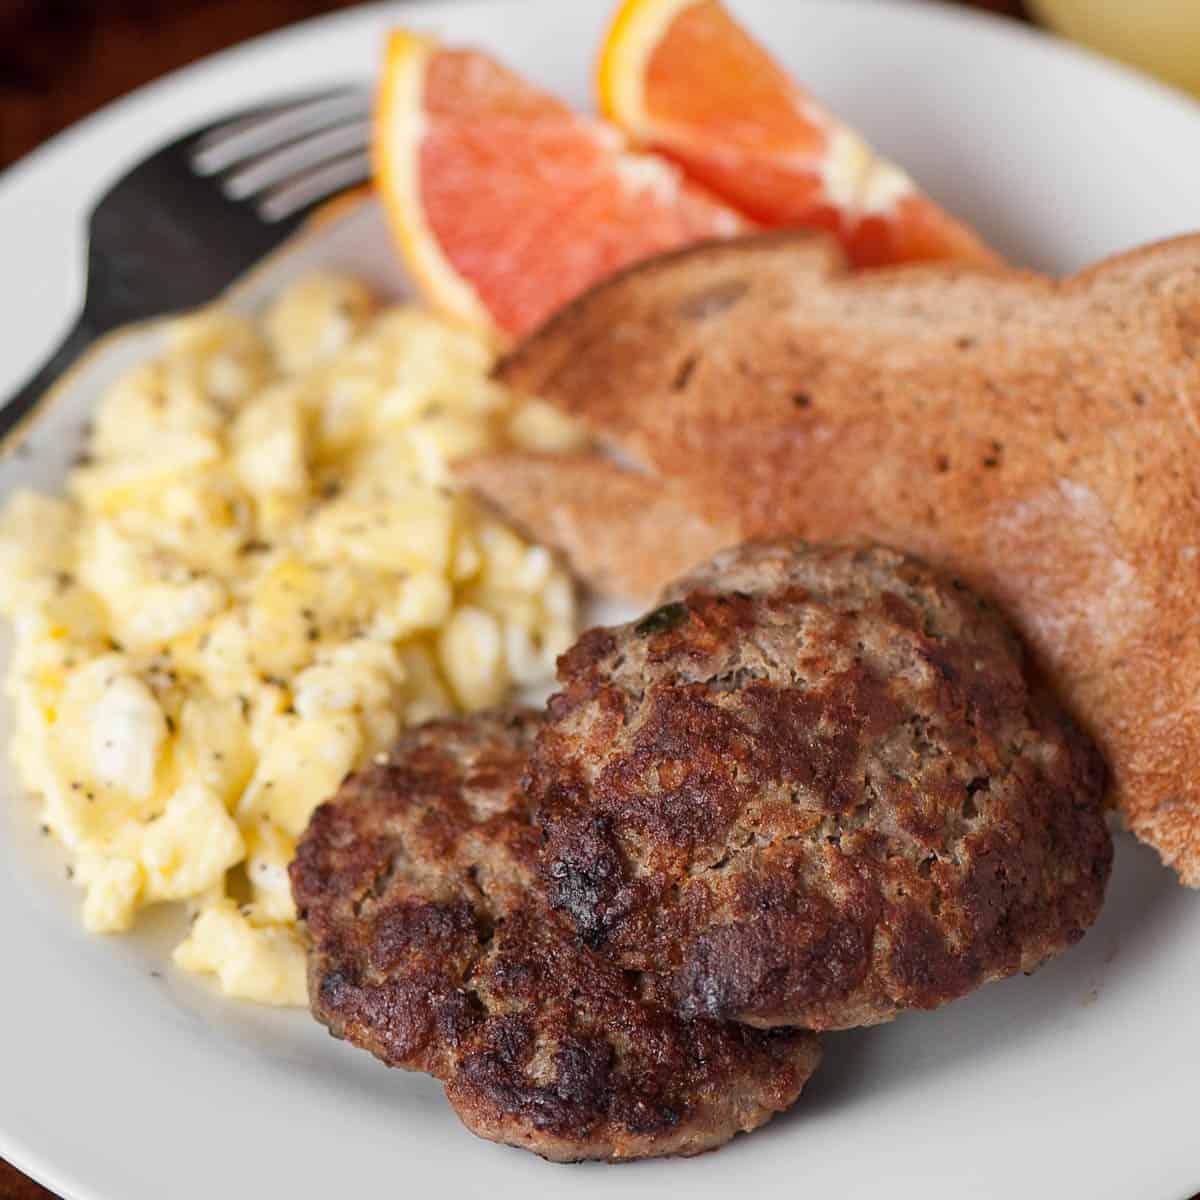 https://selfproclaimedfoodie.com/wp-content/uploads/breakfast-sausage-featured.jpg